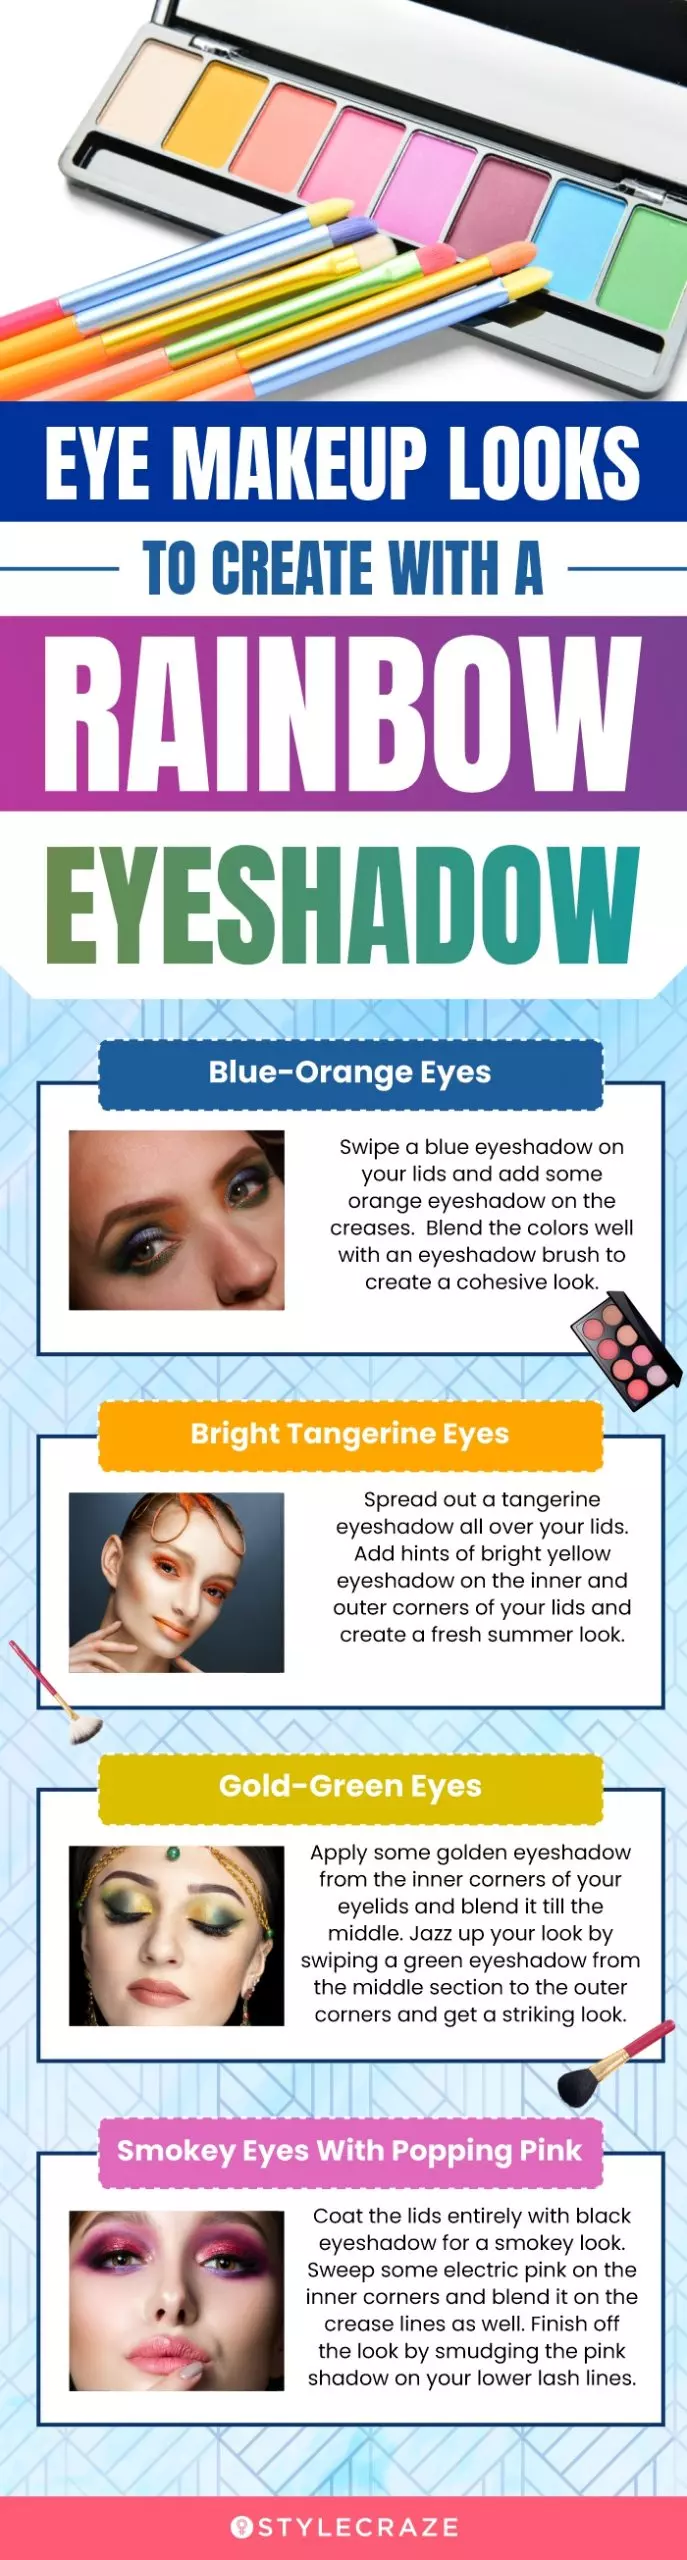 Eye Makeup Looks To Create With A Rainbow Eyeshadow Palette (infographic)